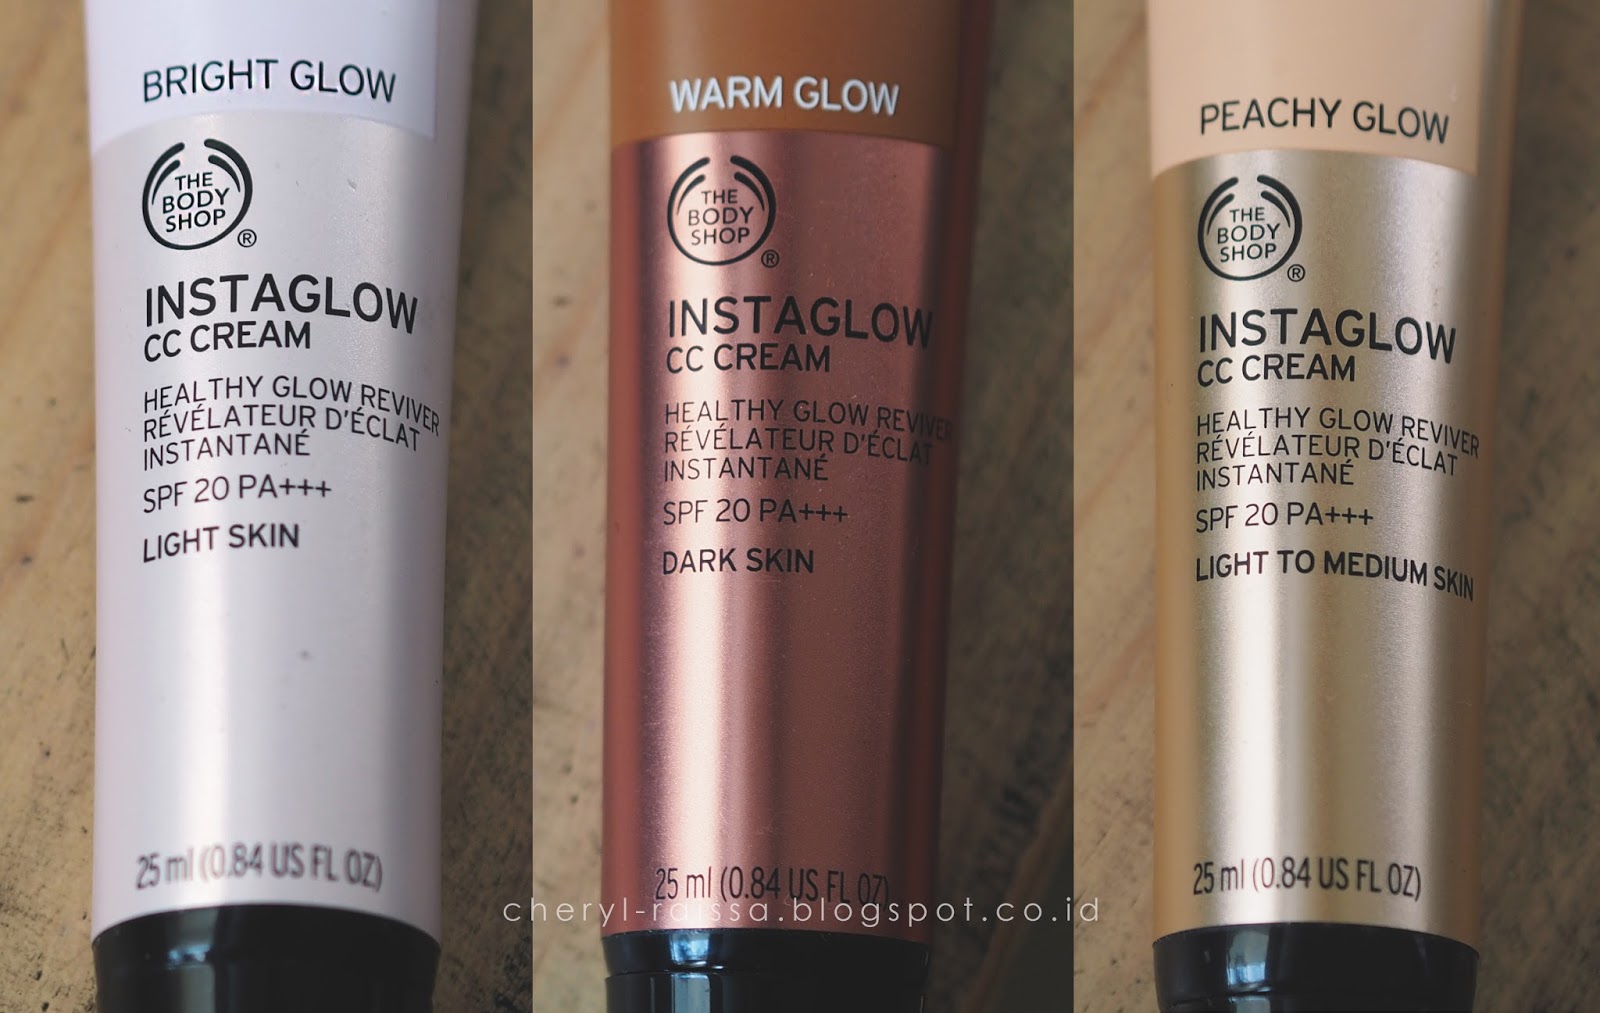 Review The Body Shop InstaGlow CC Cream And Fresh Nude Cushion